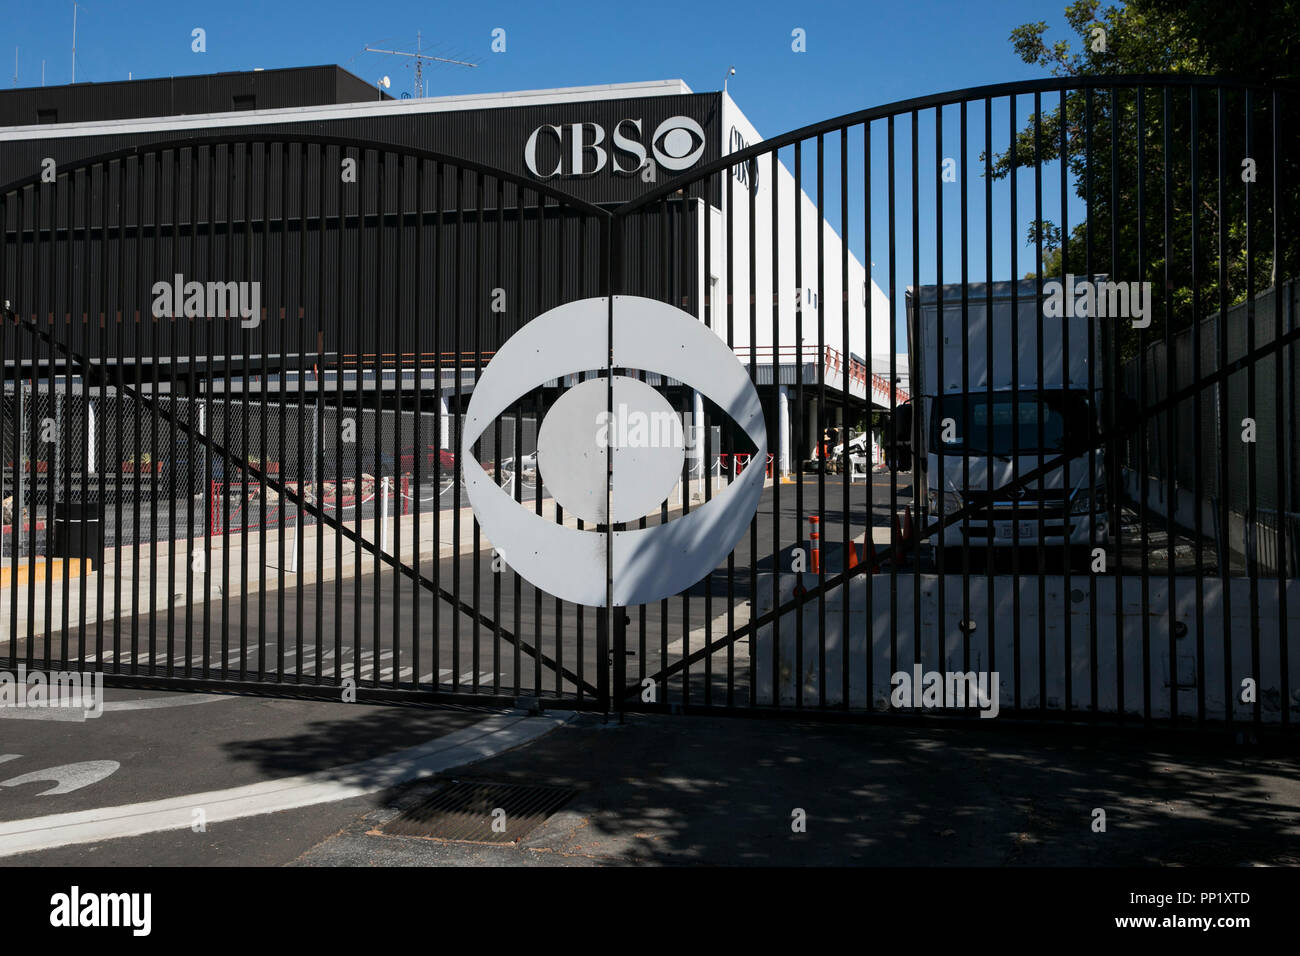 A logo sign outside of CBS Television City in Los Angeles, California on September 15, 2018. Stock Photo